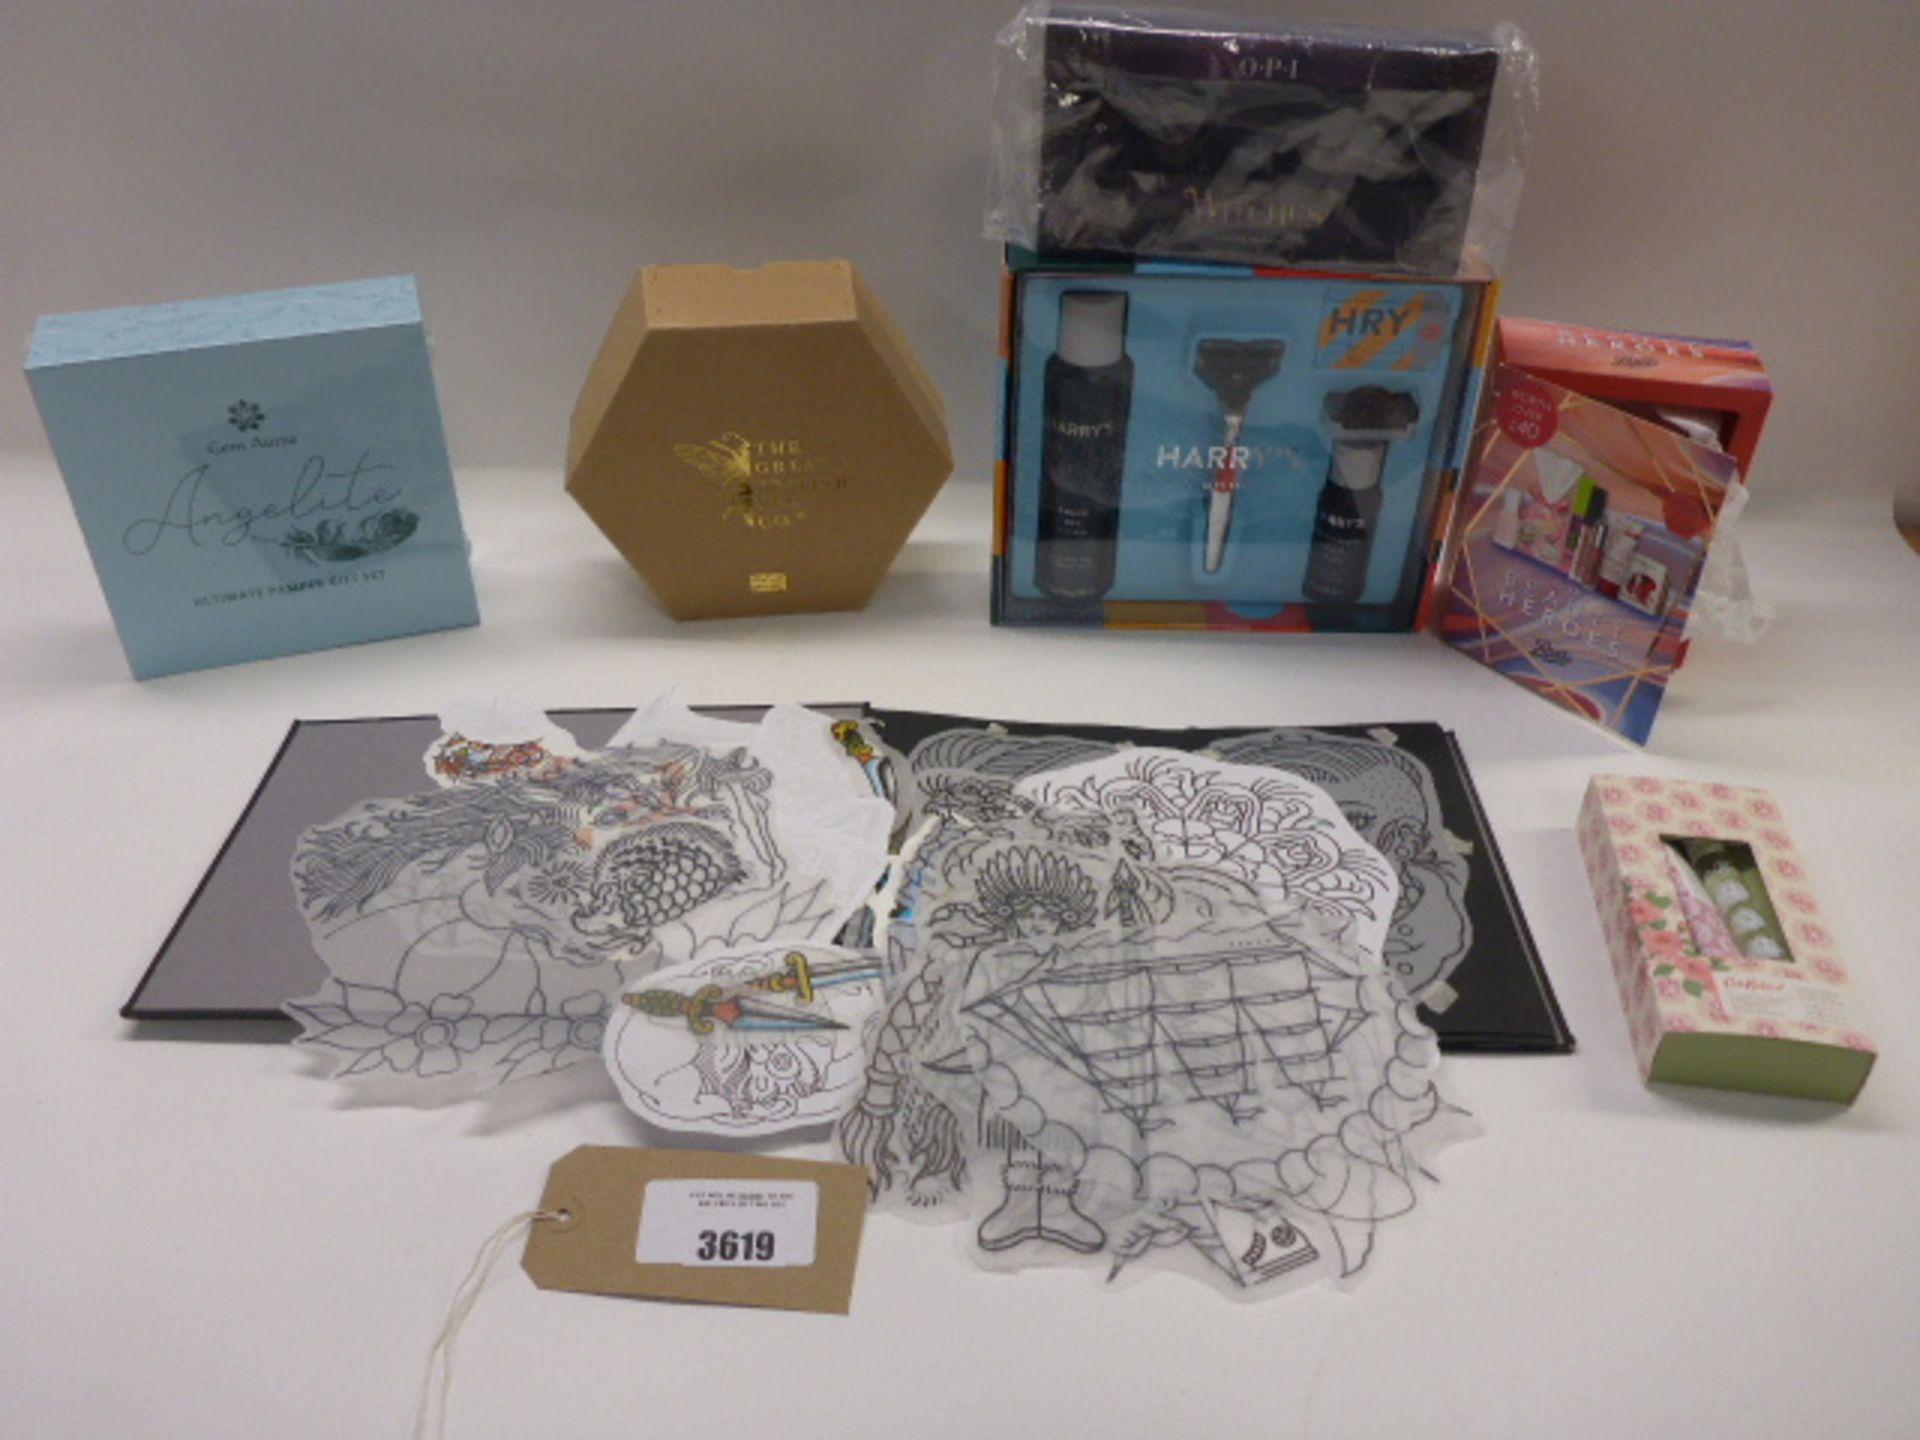 Harry's, Gem Auras, OPI, Great British Bee Co gift box sets and book of Tattoo stencils